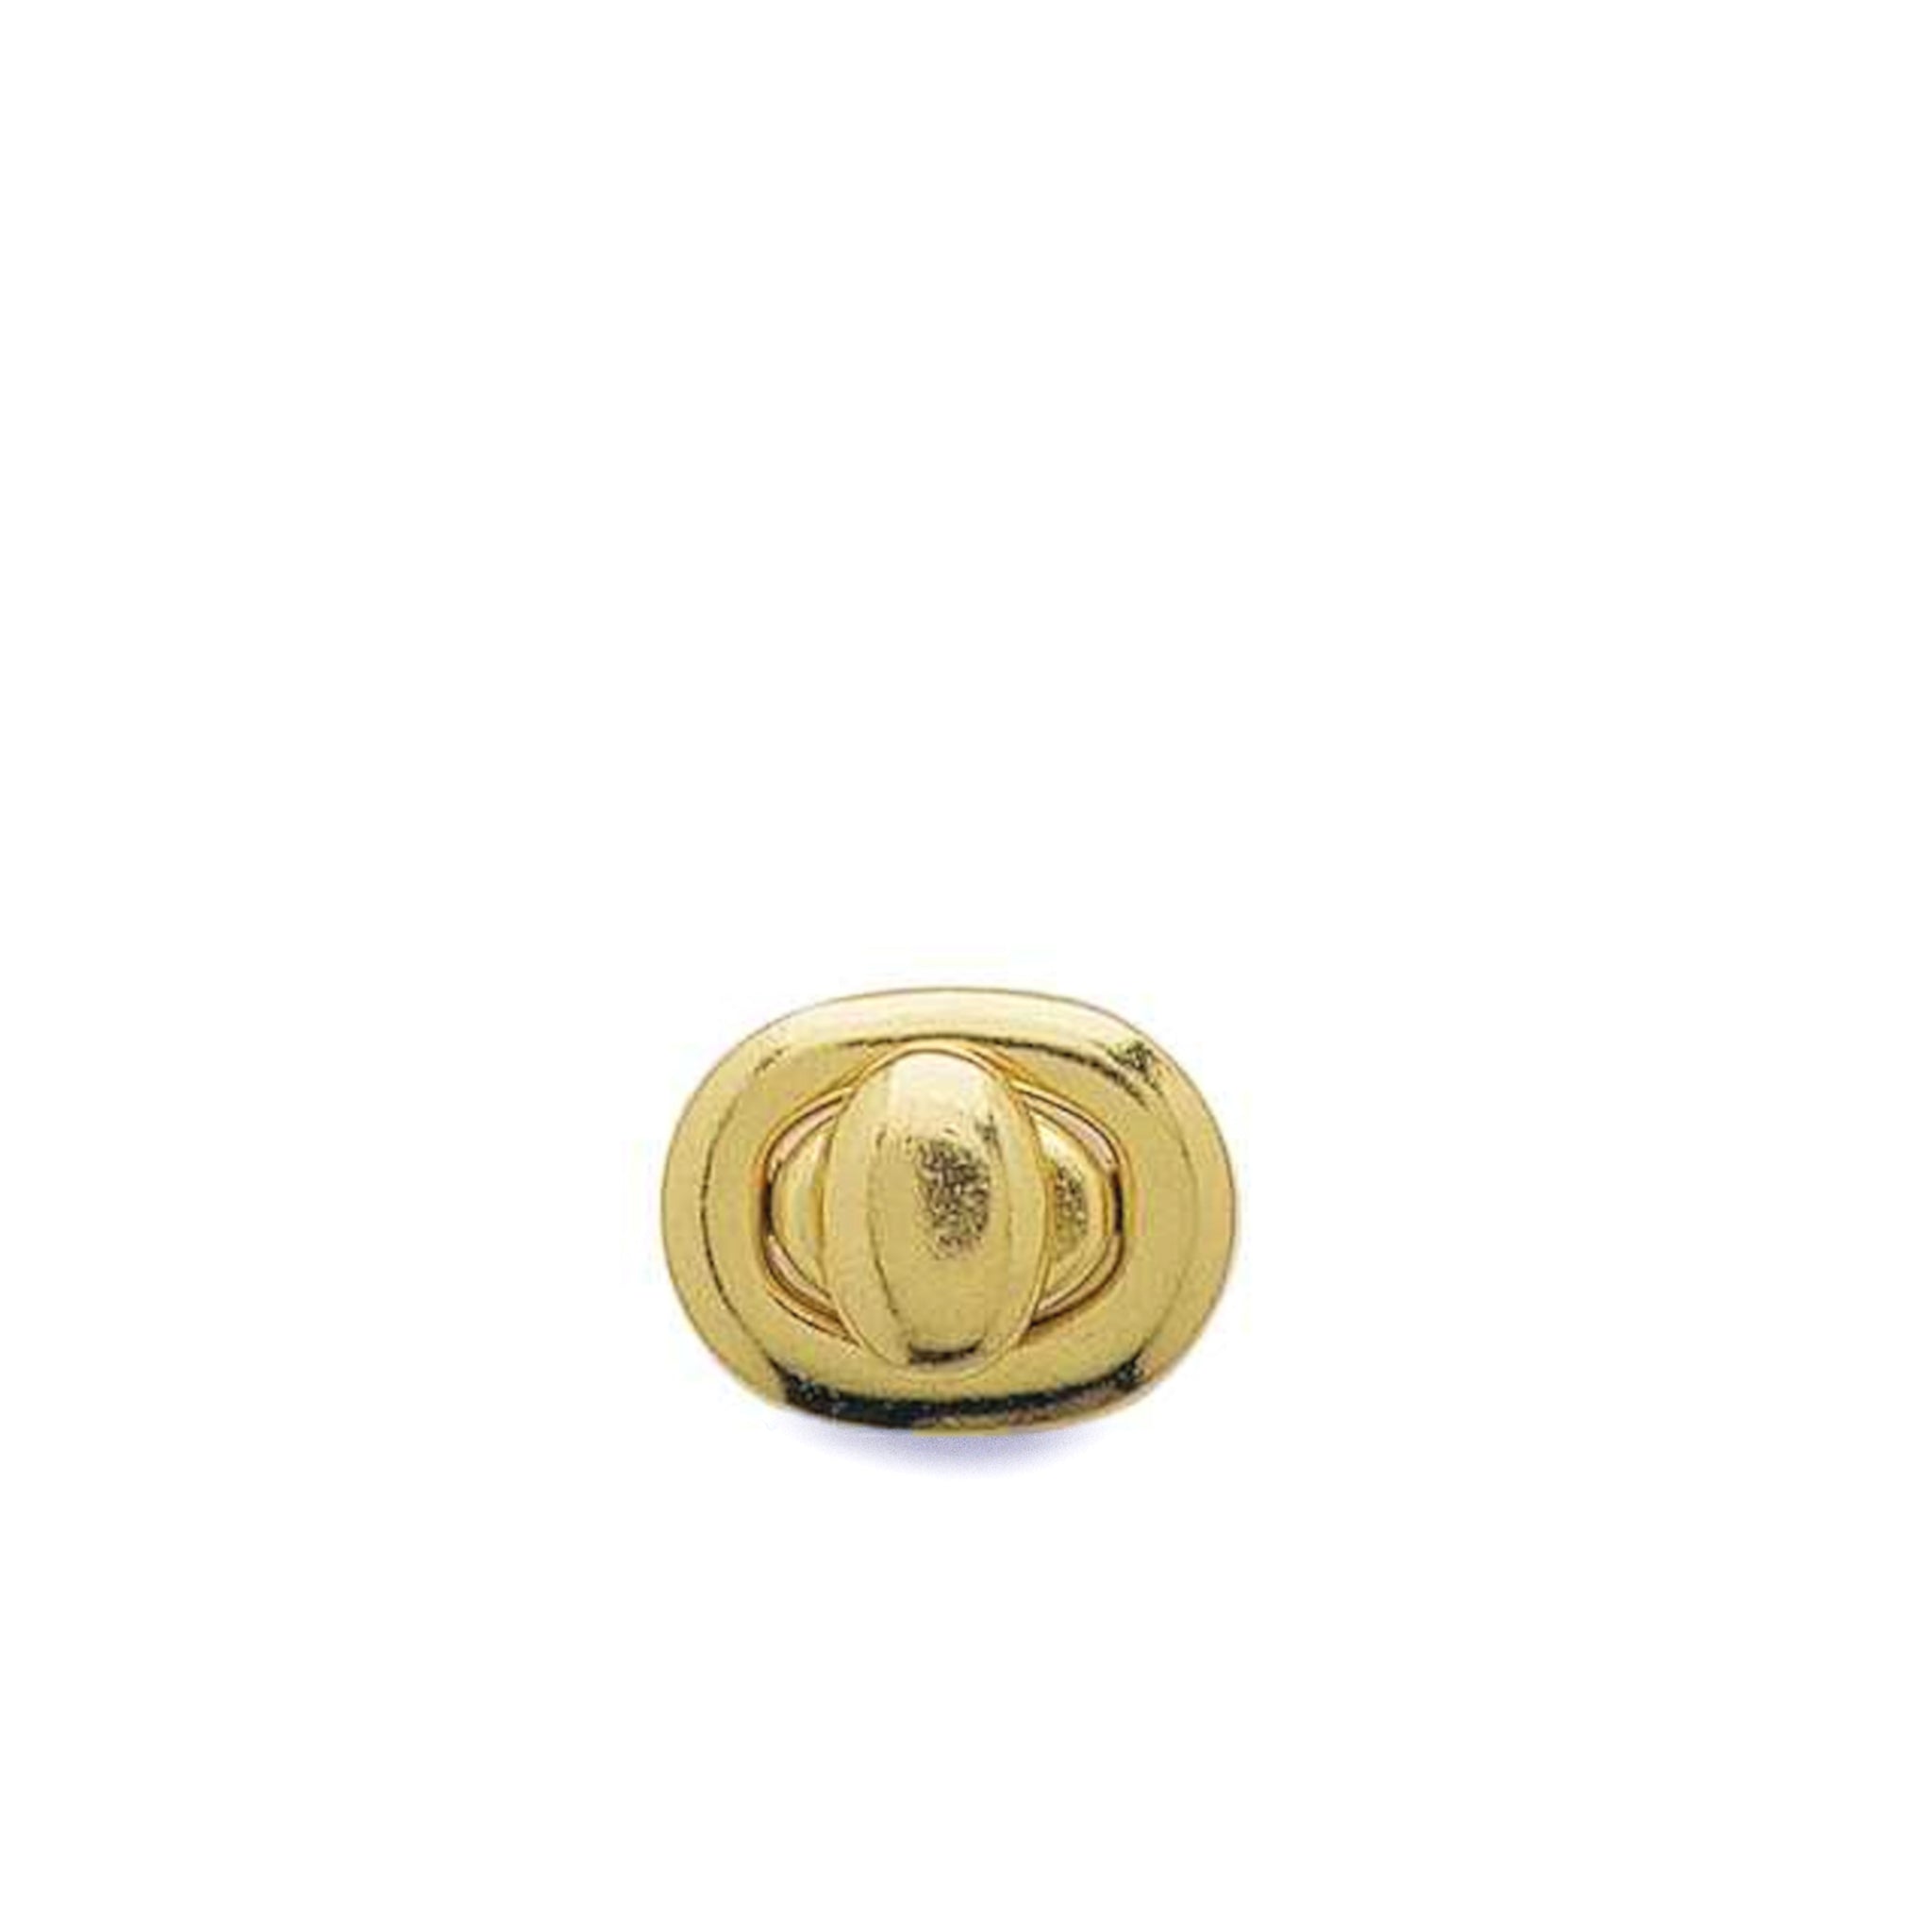 Small oval turn lock clasp in a choice of finishes for leather bag making, fastening closing bags or pouches, nickel free.